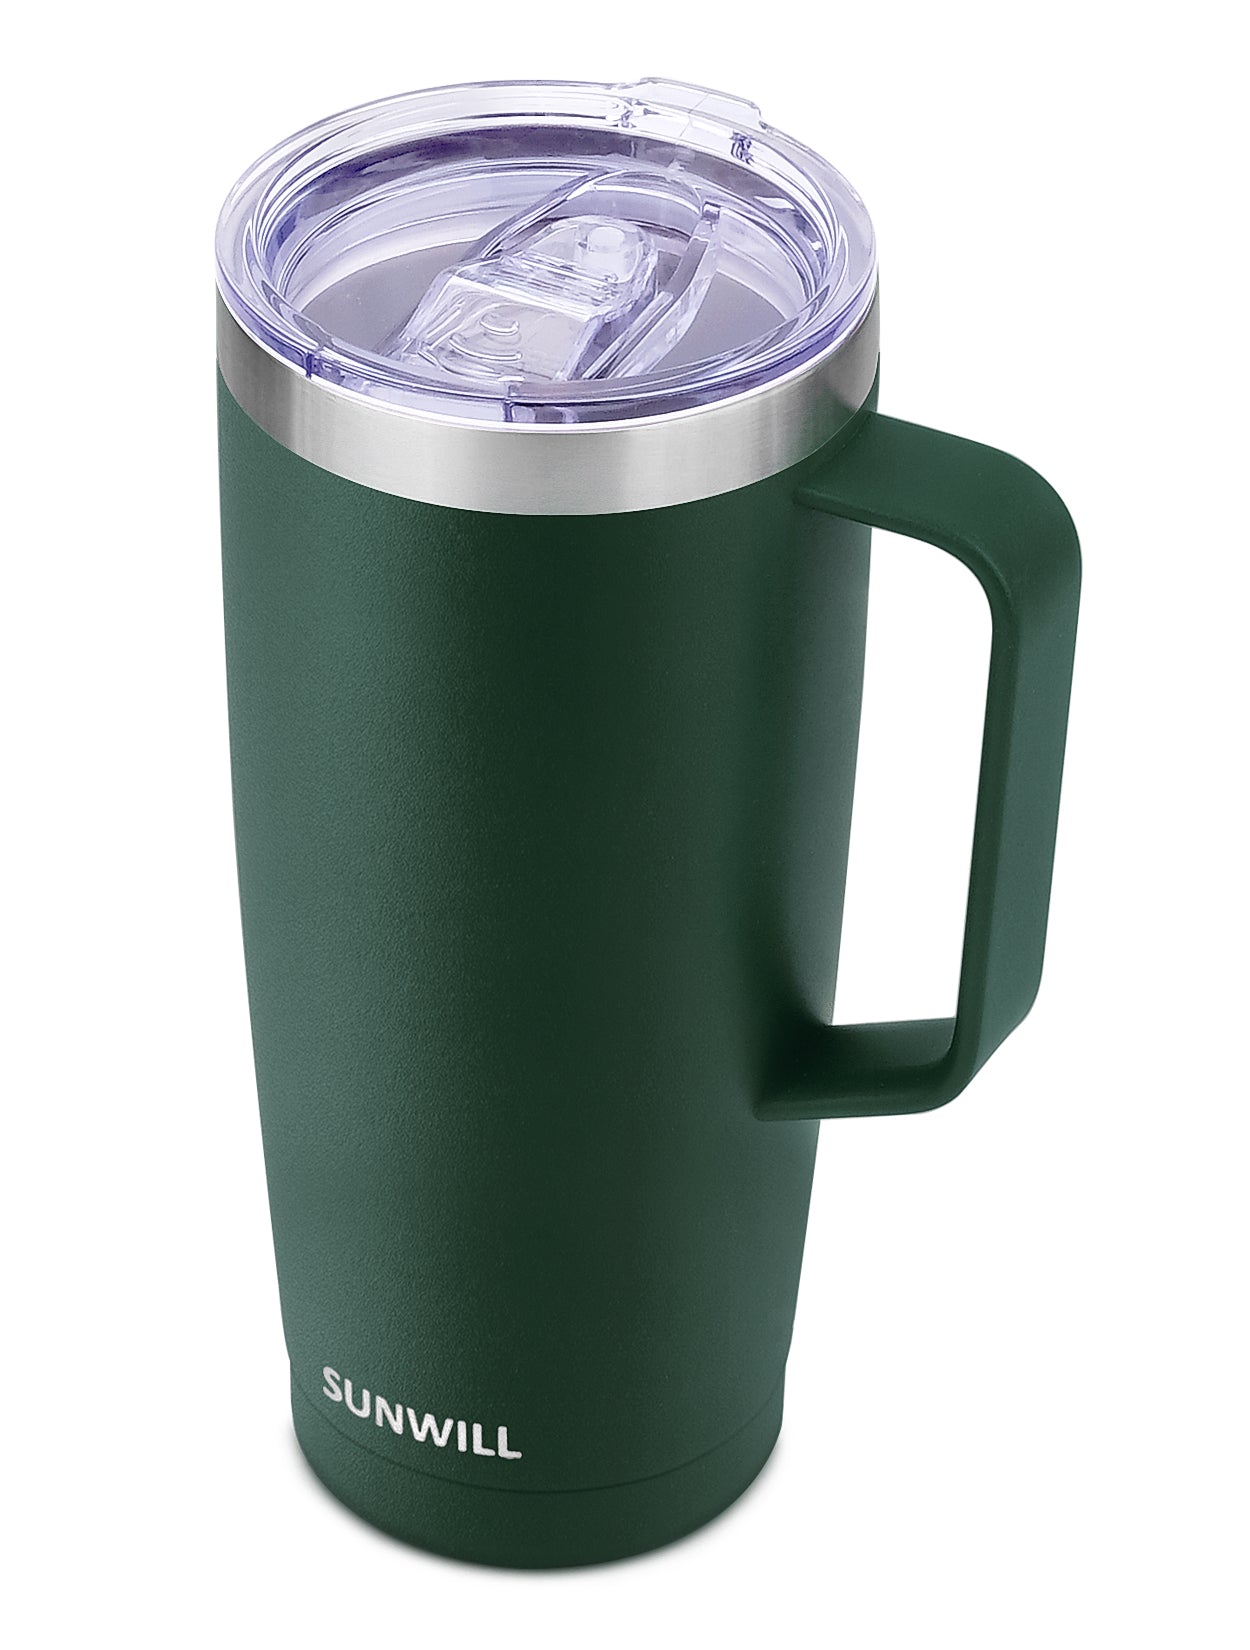 Goodful Travel Mug, Stainless Steel Insulated, Double Wall Vacuum Sealed  Coffee Cup with Leak Proof Lid, 14 Ounce, Sage